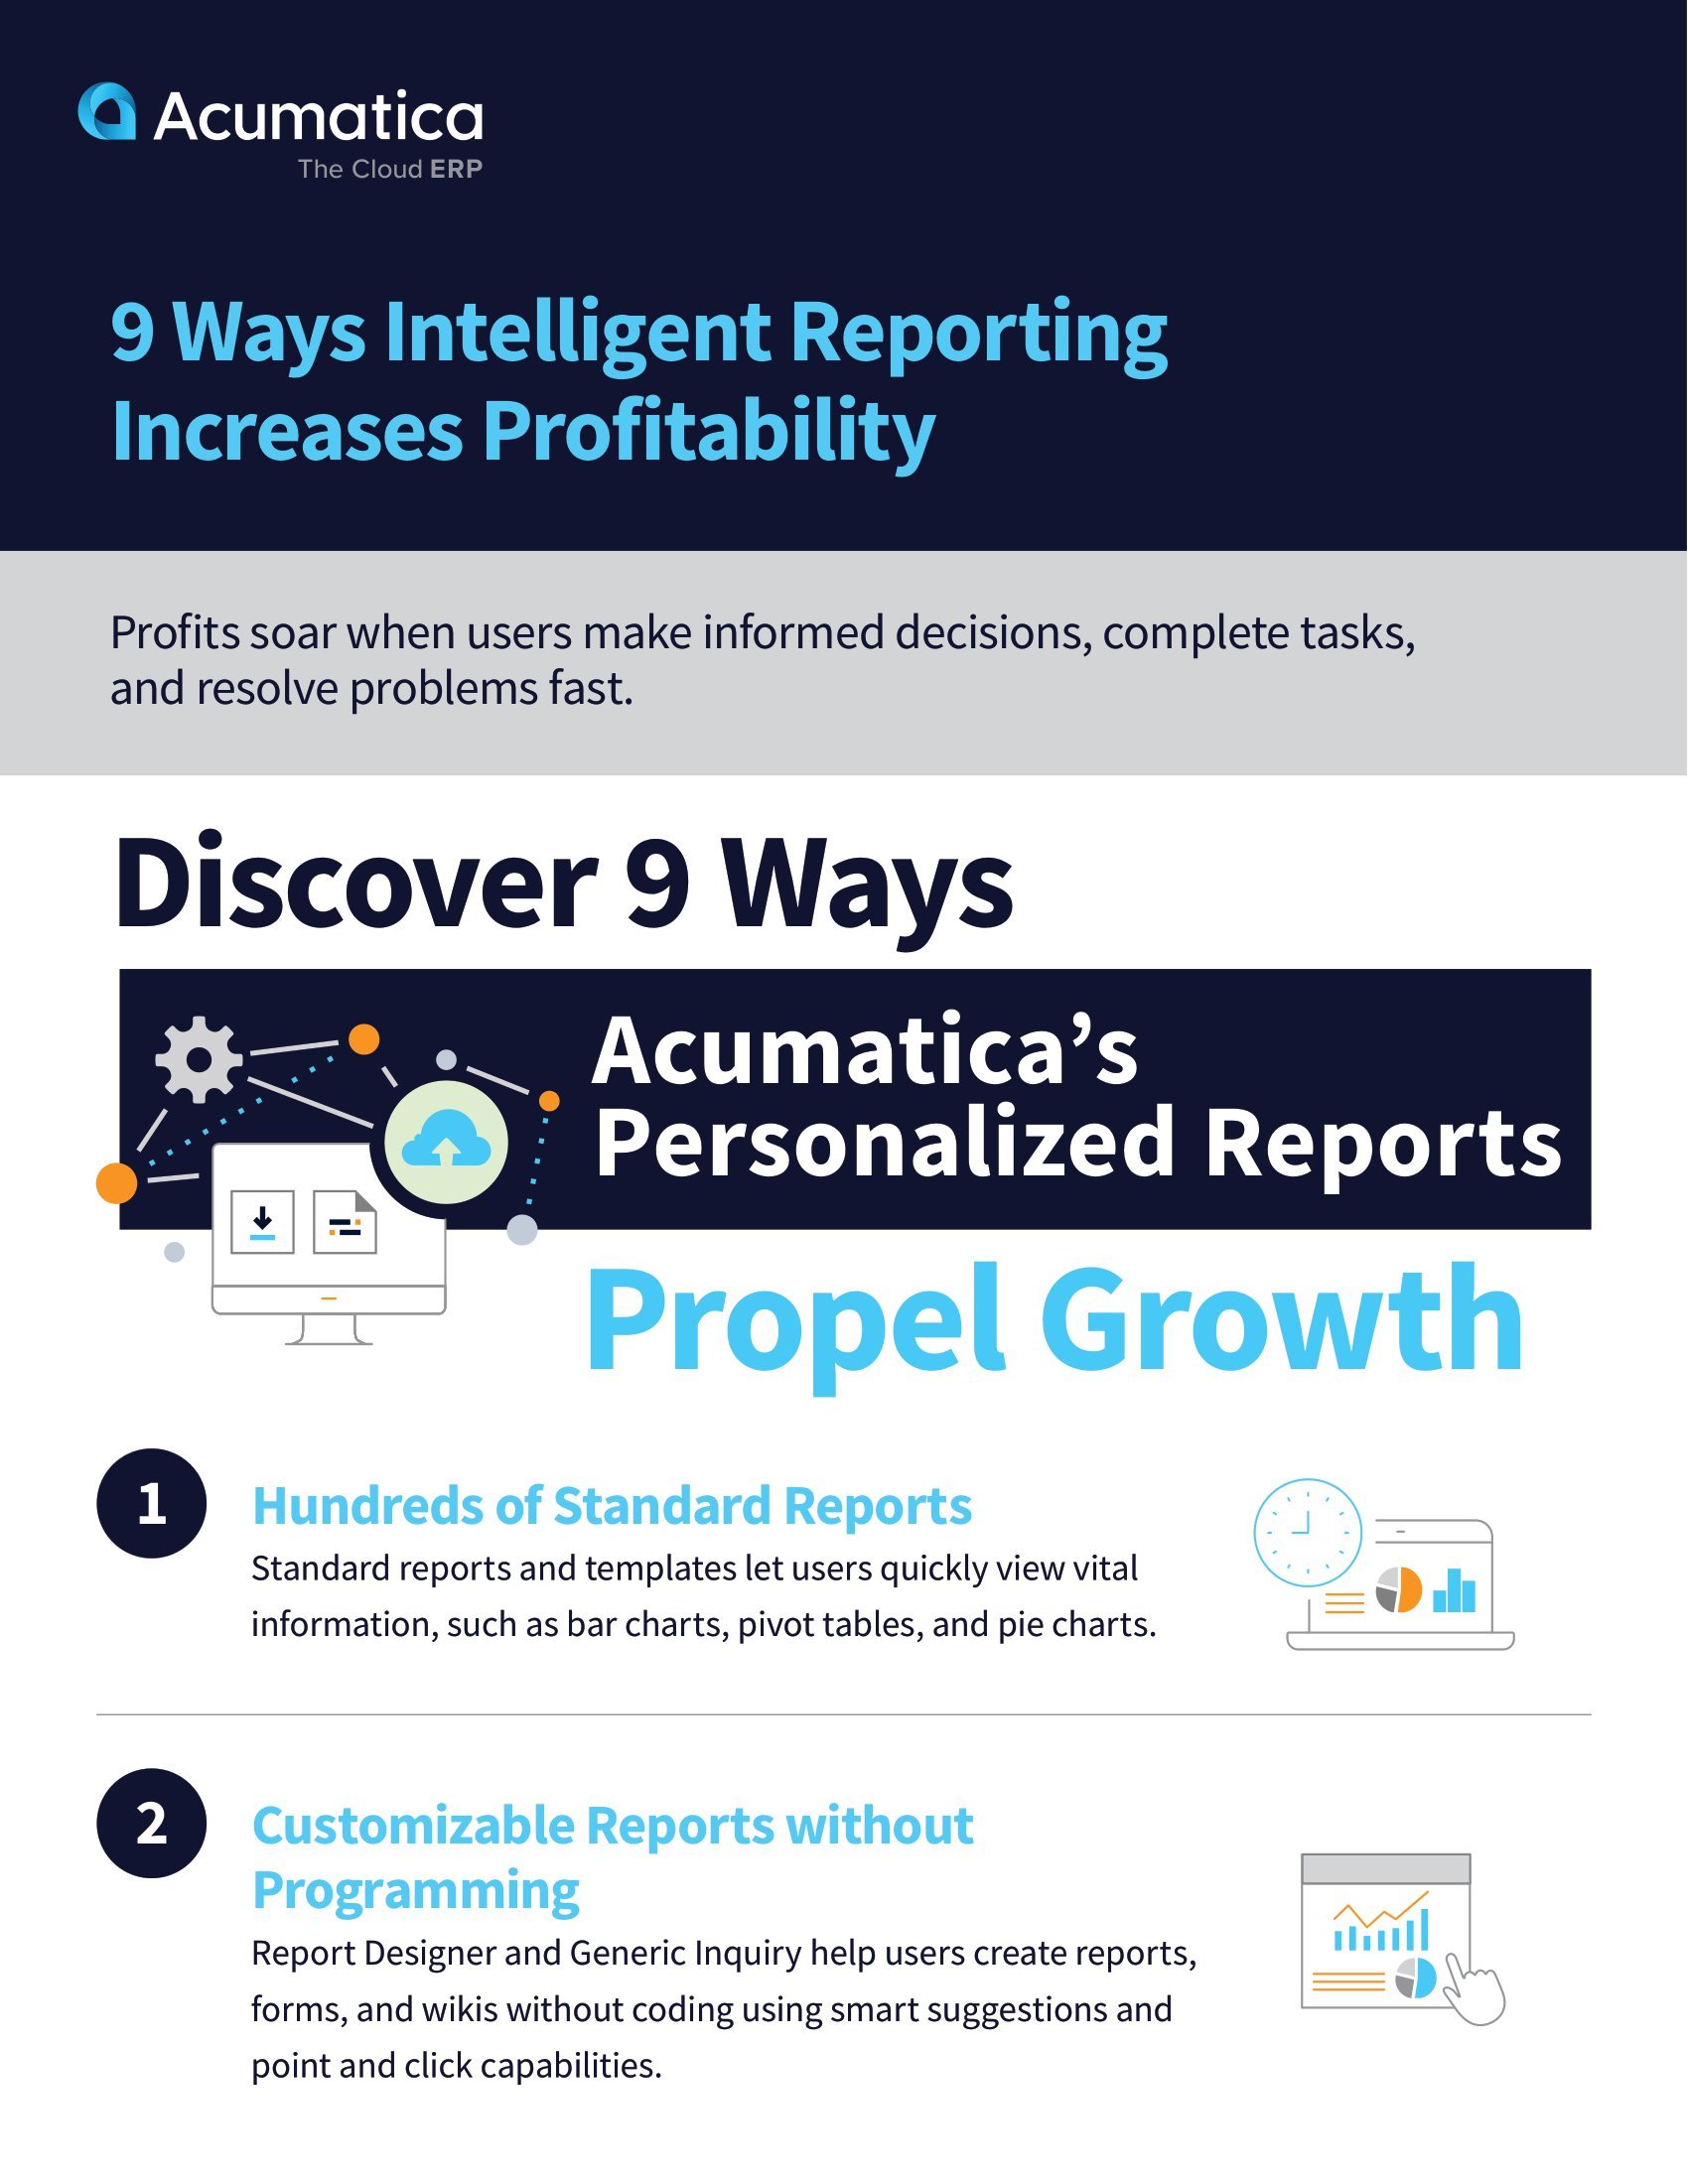 Power Profitability with Intelligent Reporting